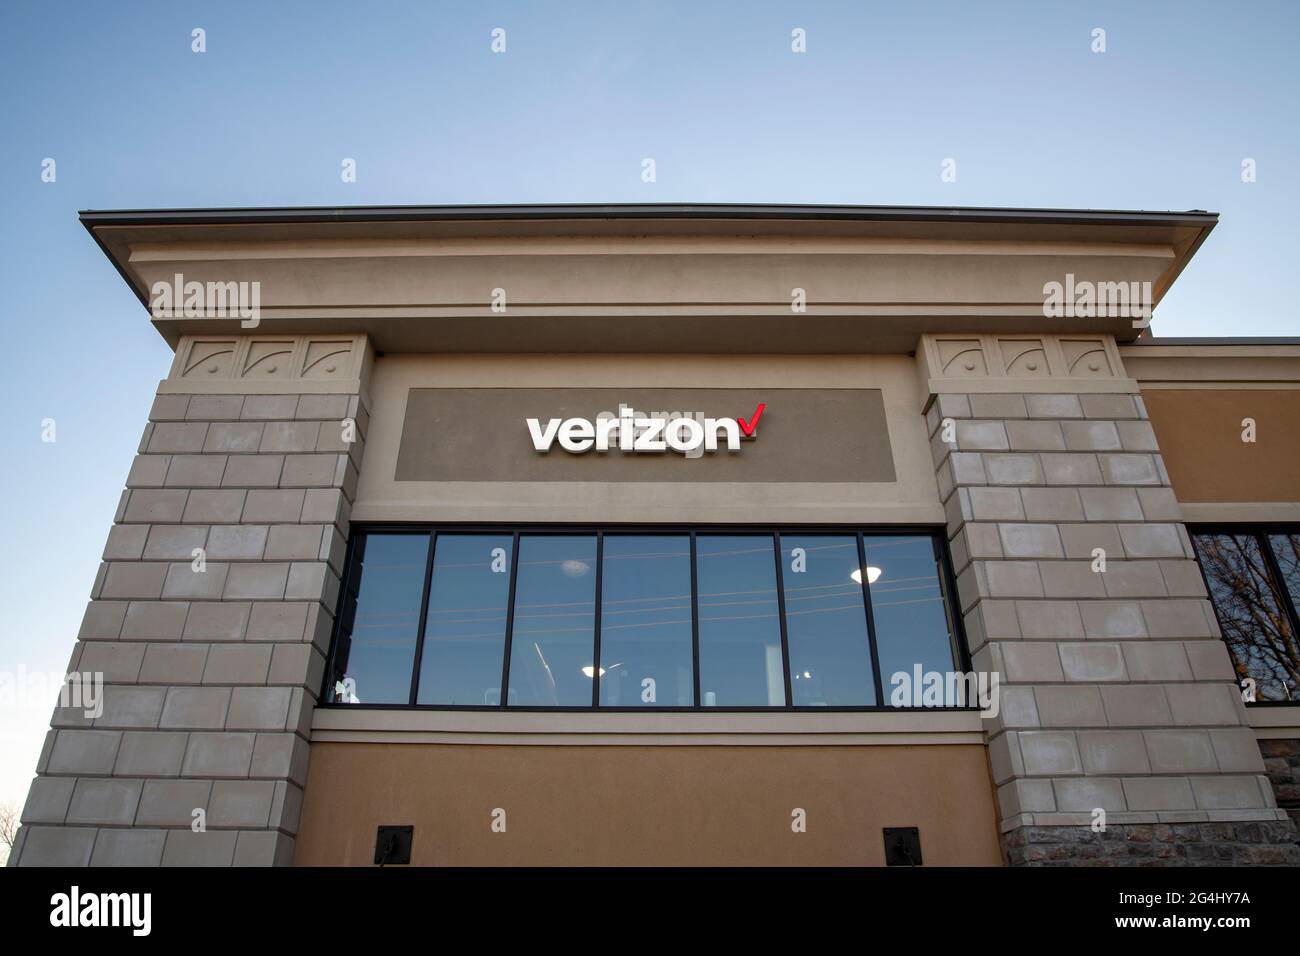 Lansing, Kansas. Verizon logo on building. Verizon, an American wireless network operator is one of the largest communication technology companies in Stock Photo